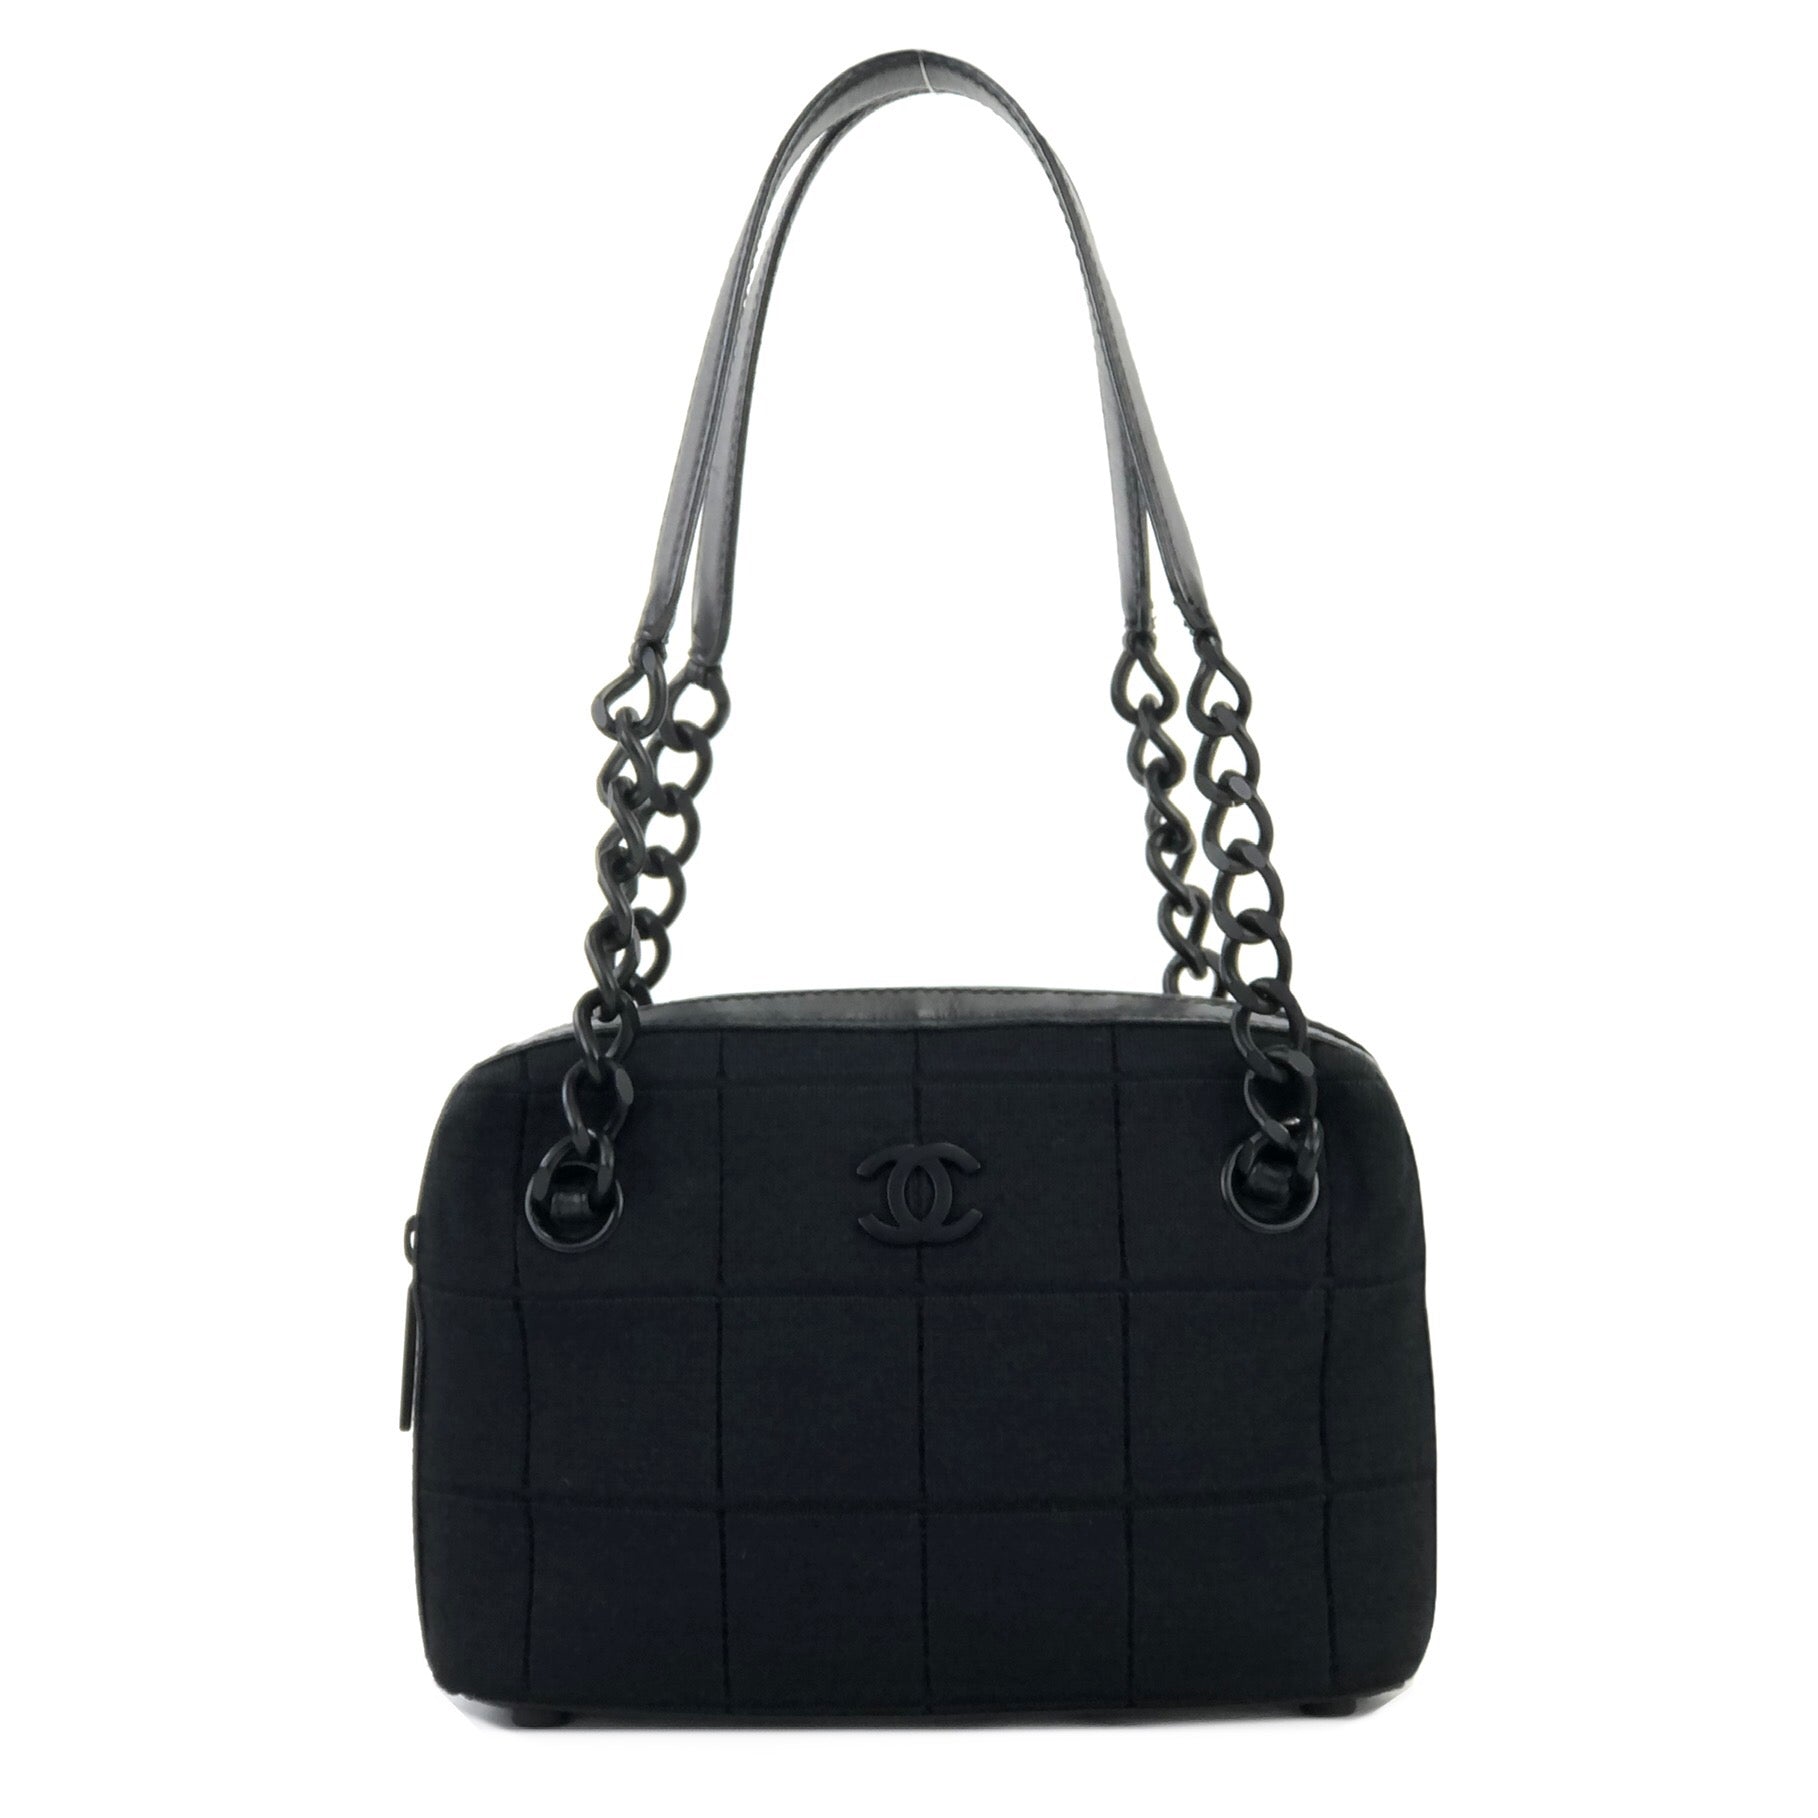 CHANEL Canvas Exterior Bags & Handbags for Women, Authenticity Guaranteed